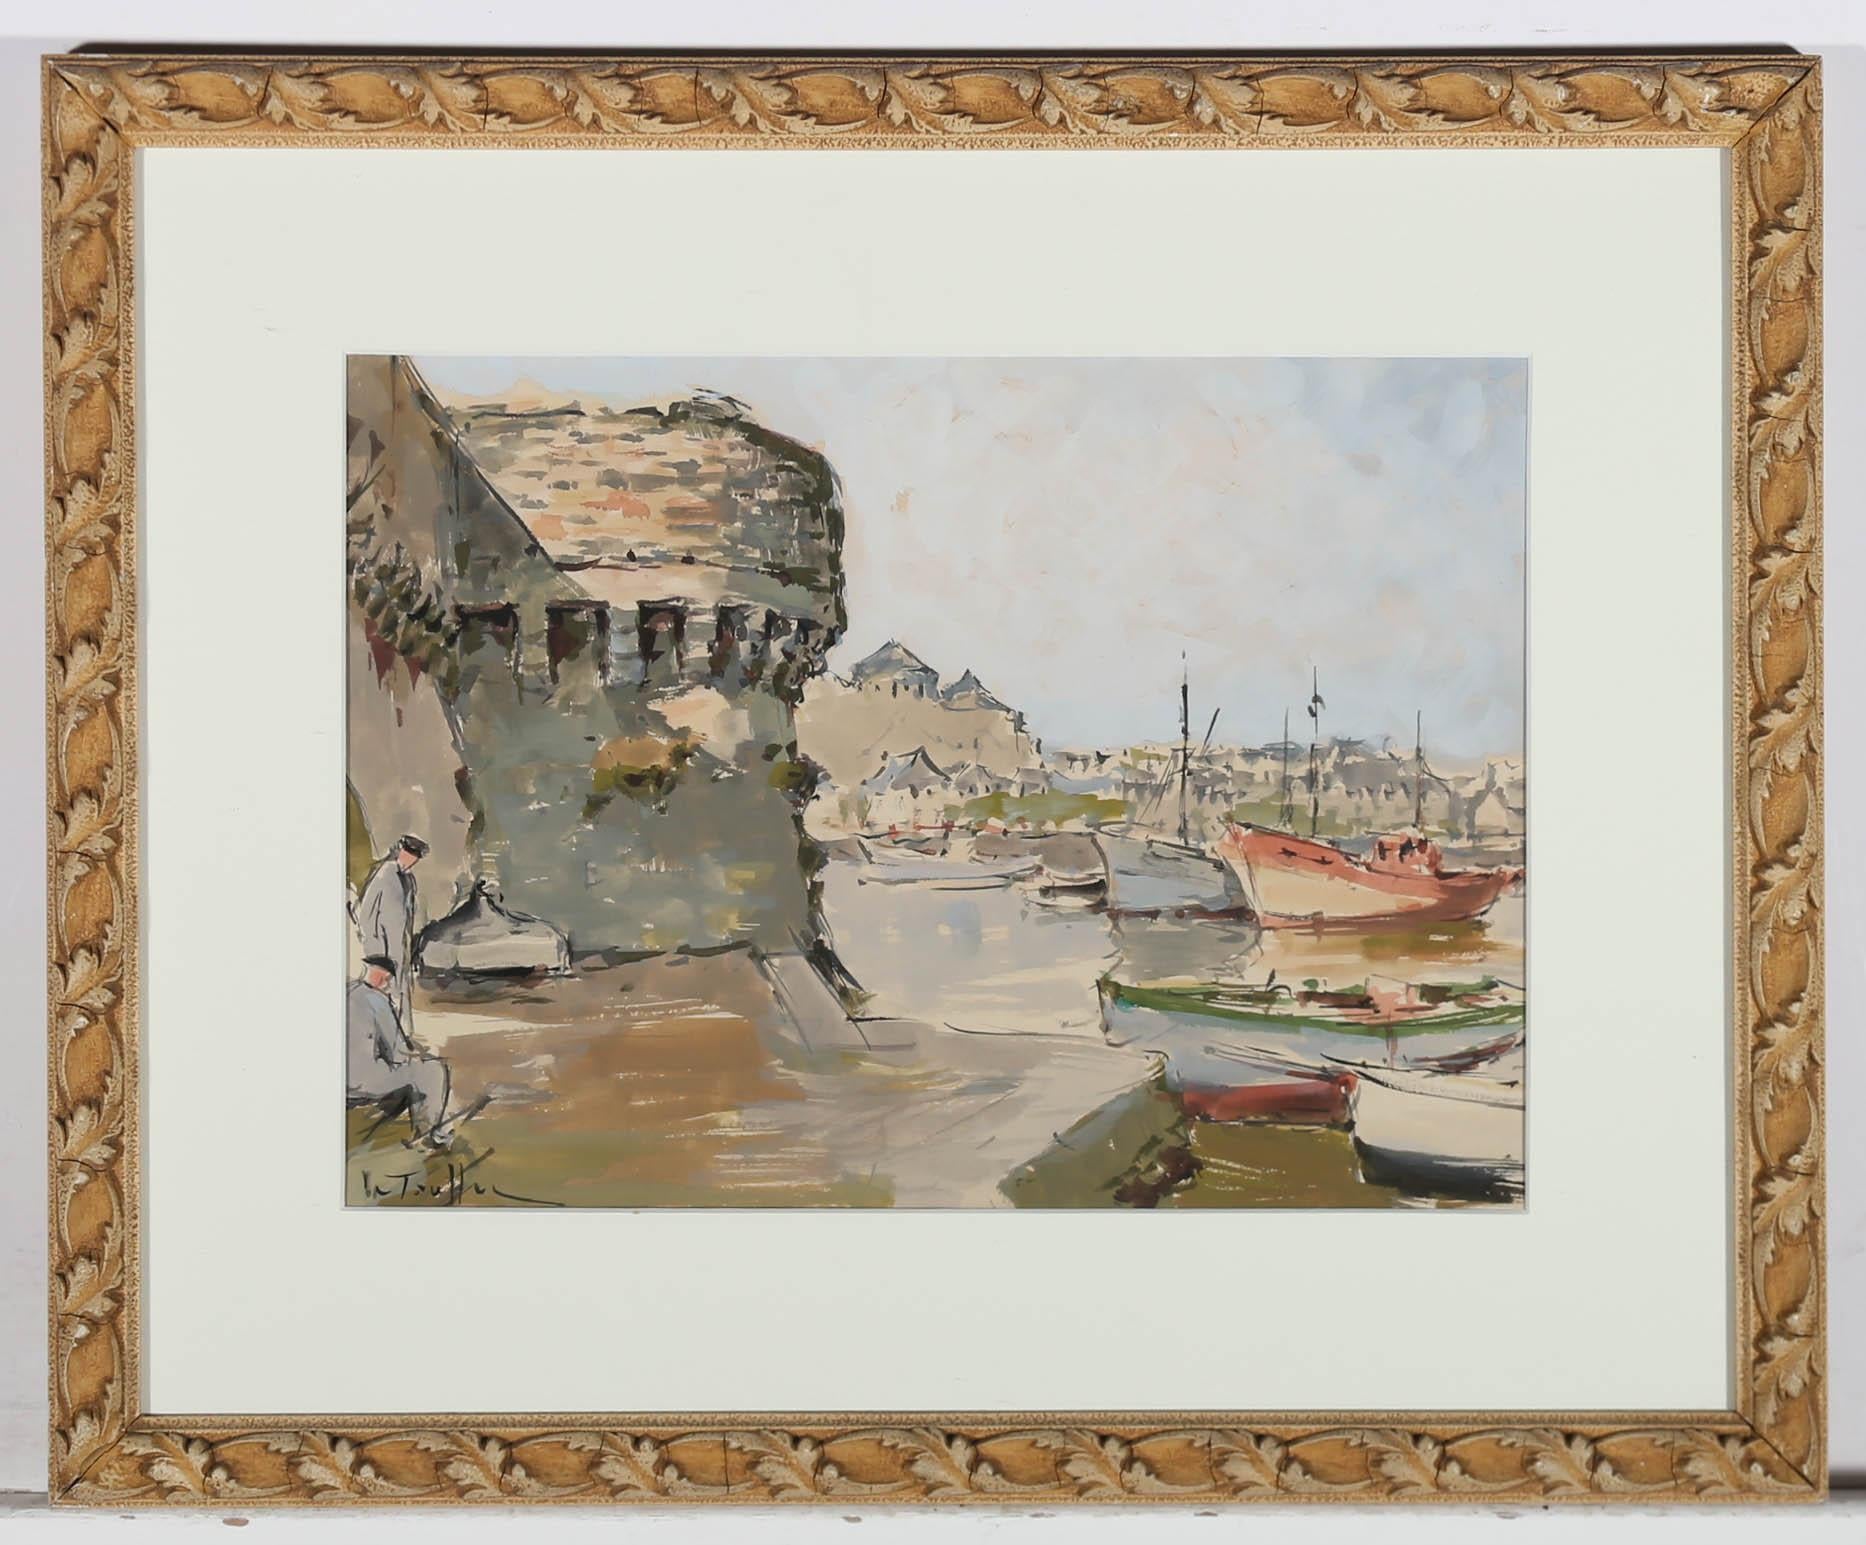 This refreshing watercolour depicts a sunny harbour scene with two fishermen noticeable beside an obtruding castellated wall. The artist has used gouache in selective areas to create a sense of movement and atmosphere in the coastal composition. The